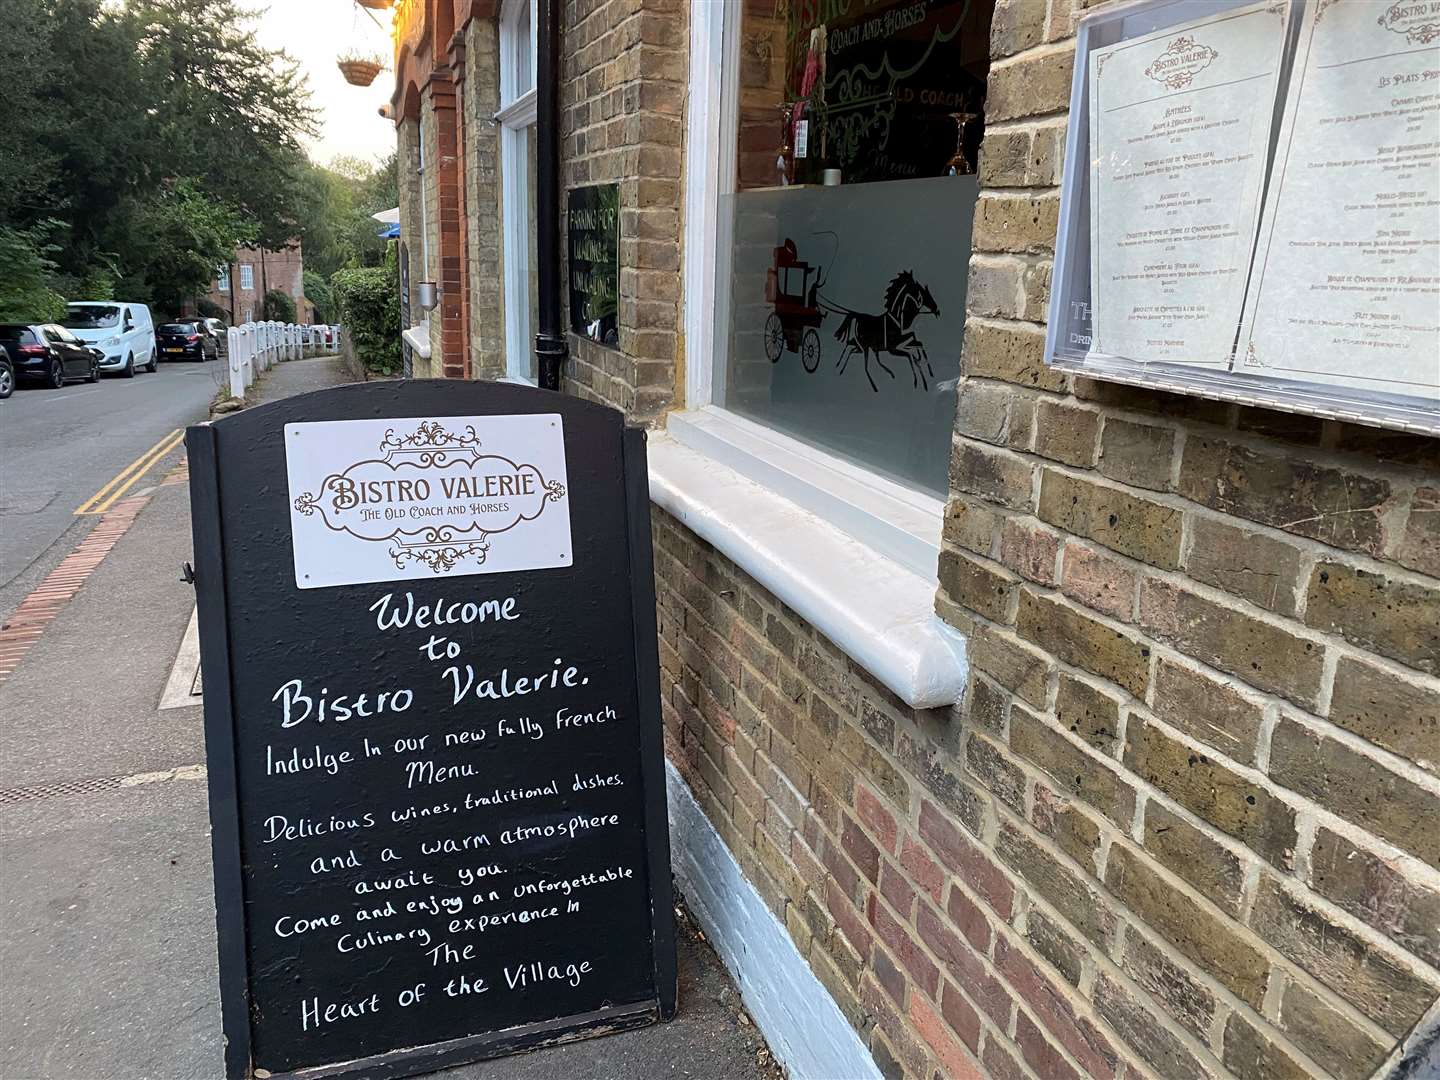 Bistro Valerie at The Old Coach and Horses in Harbledown